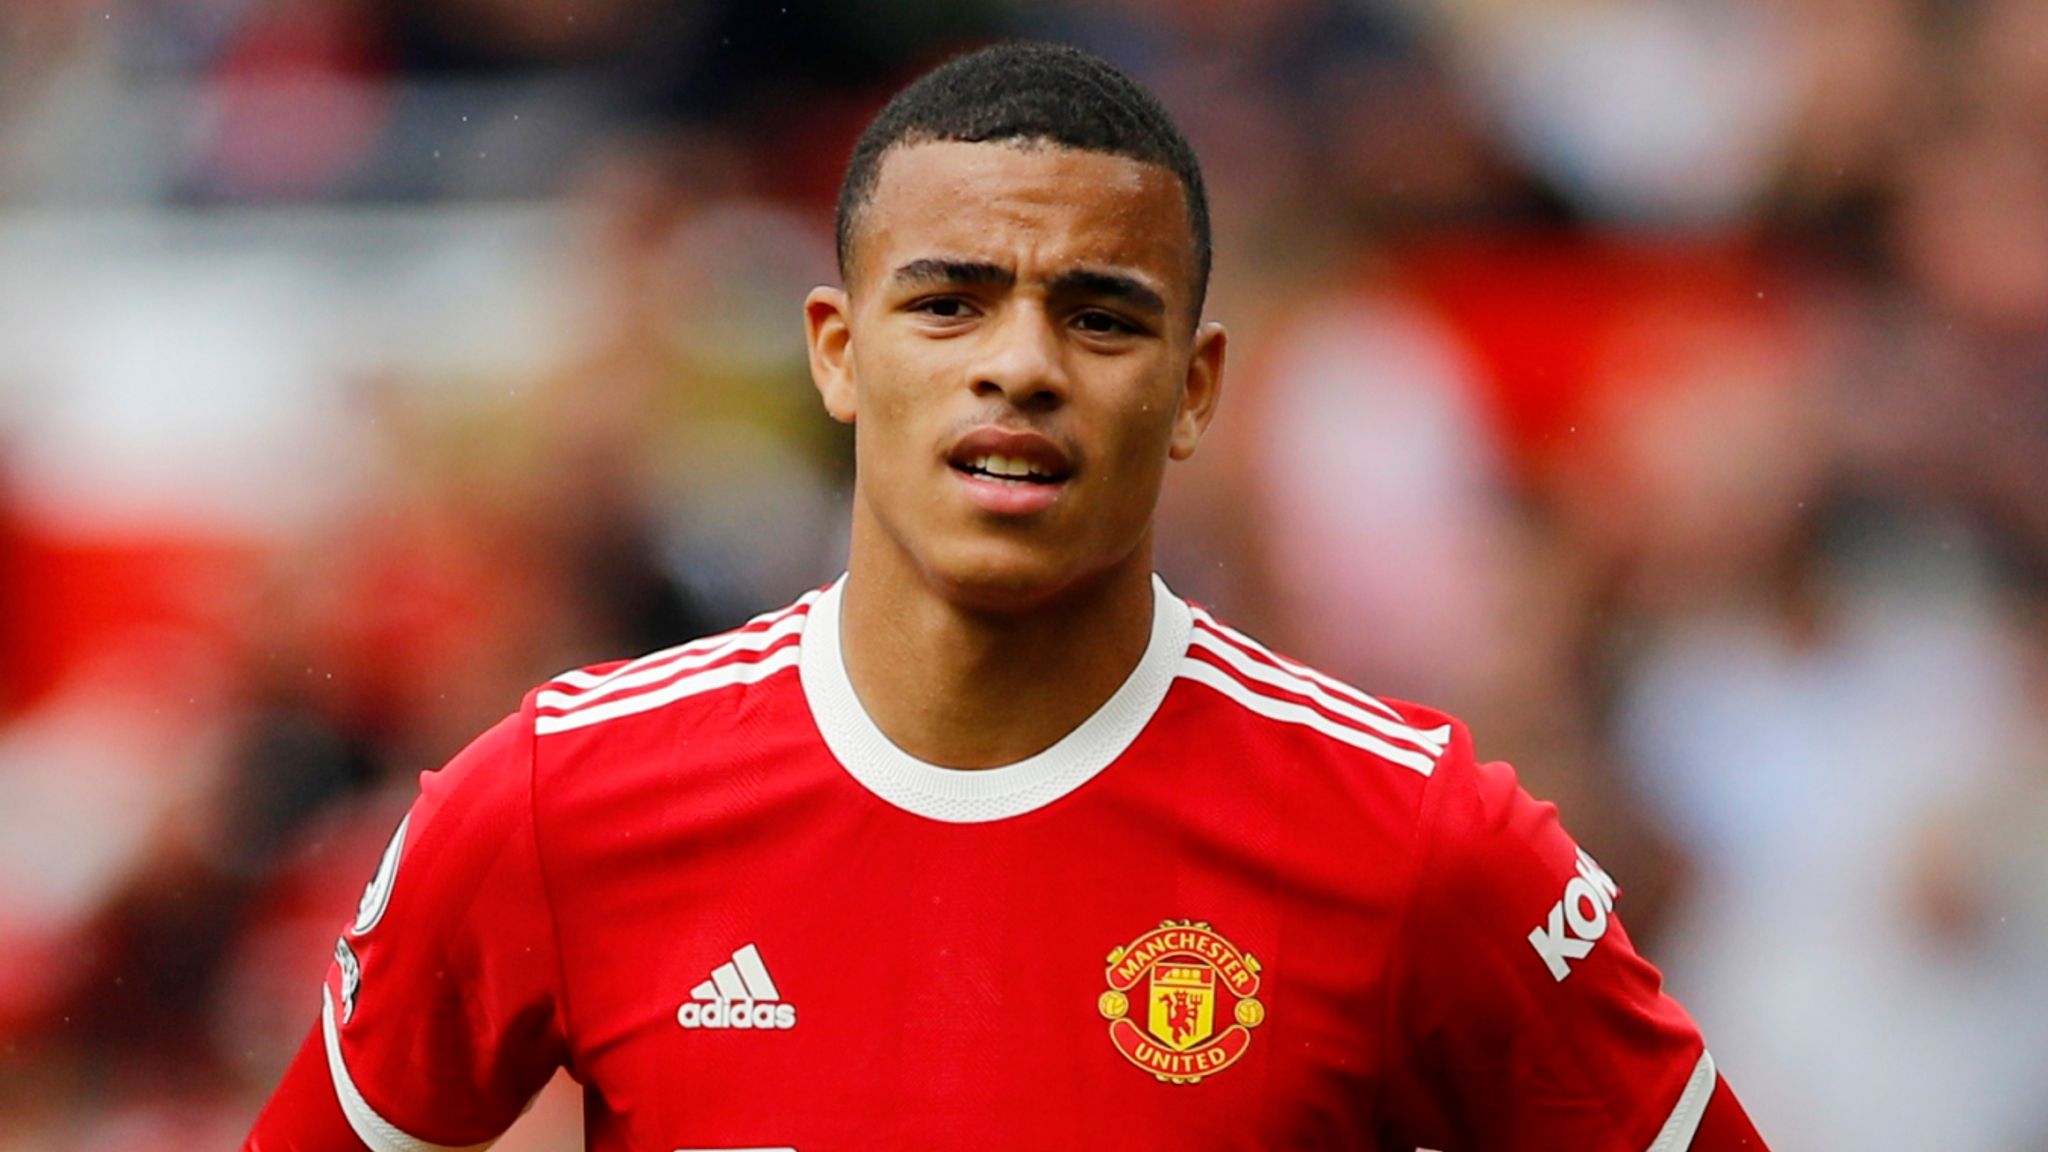 Mason Greenwood's new manager says loan signing is 'delicate issue' | World News | Sky News